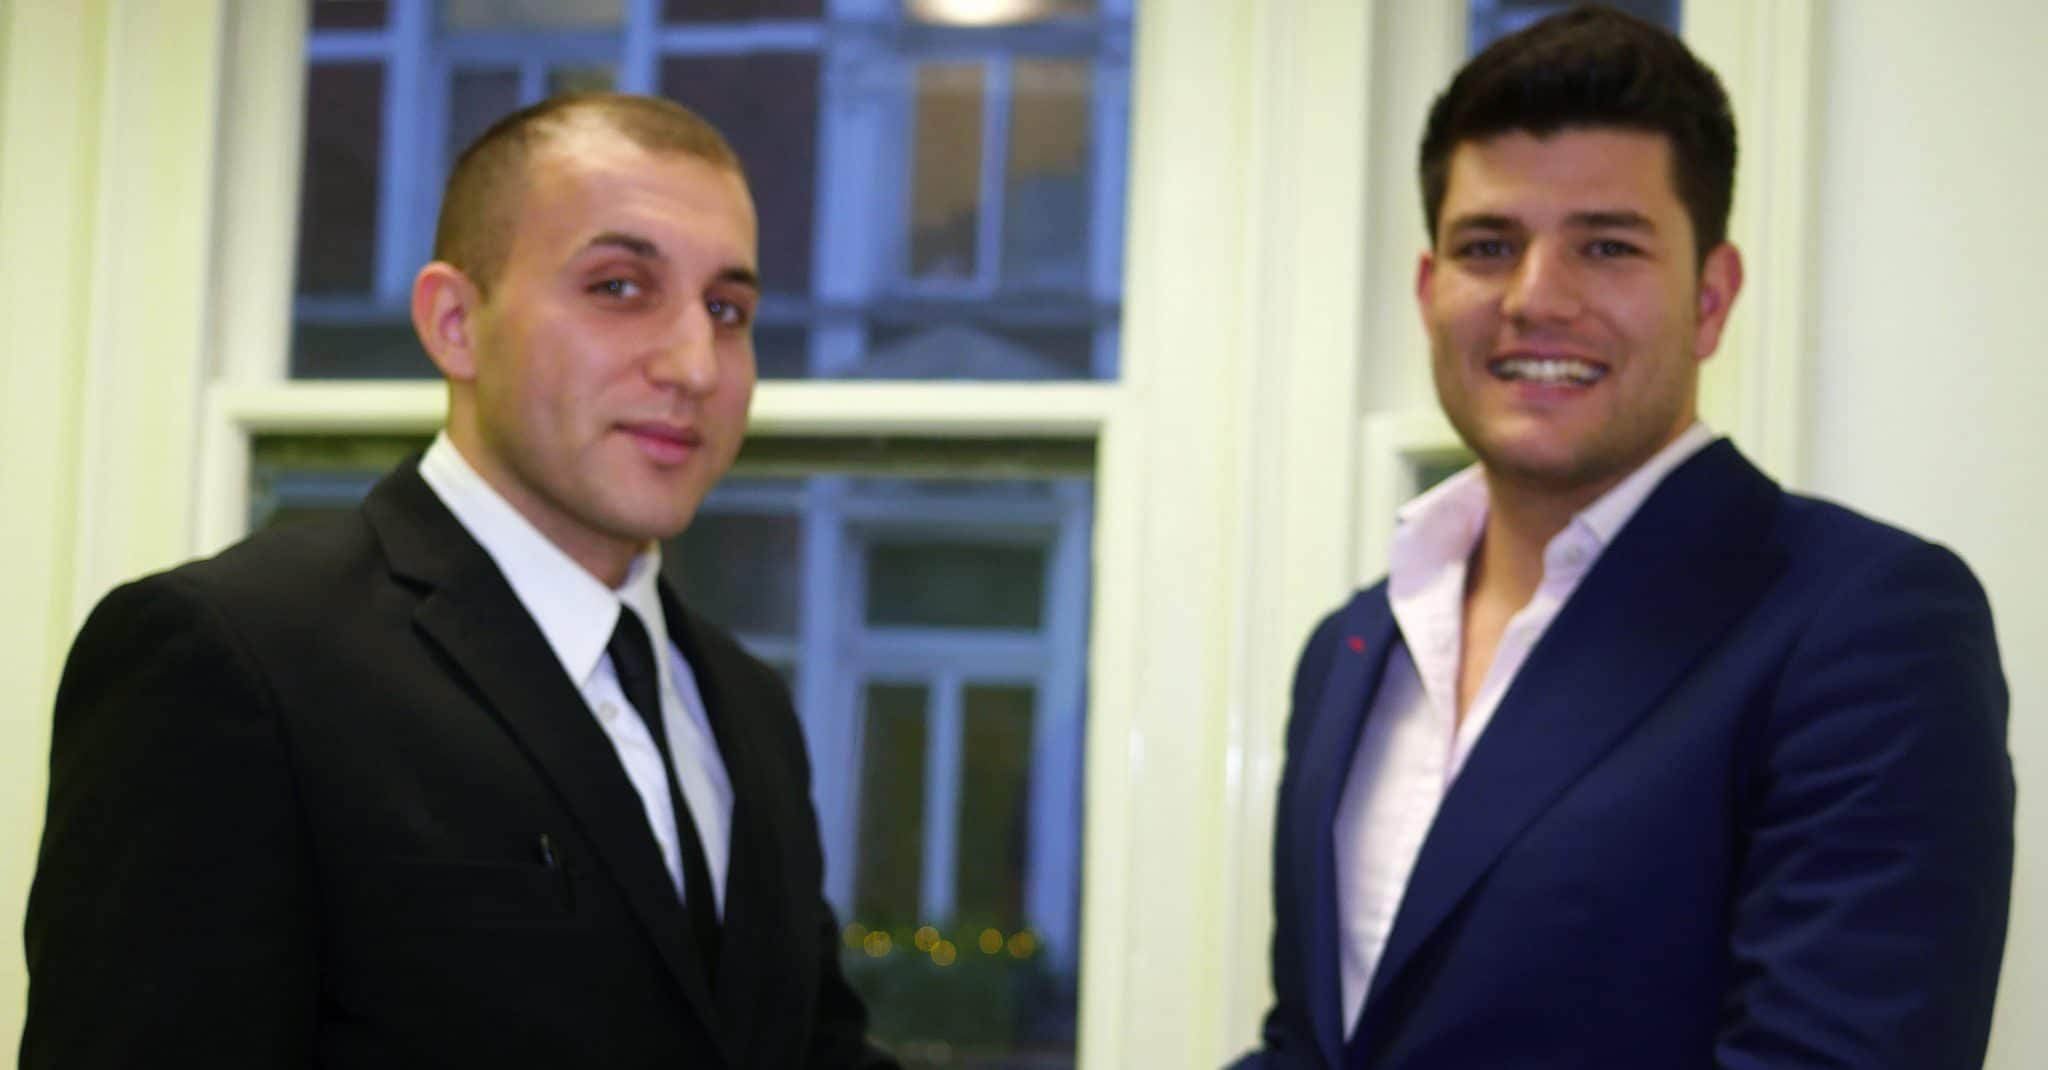 Derin cag (Founder of Richtopia) and Mark Wright (Winner of BBC The Apprentice Series 10)